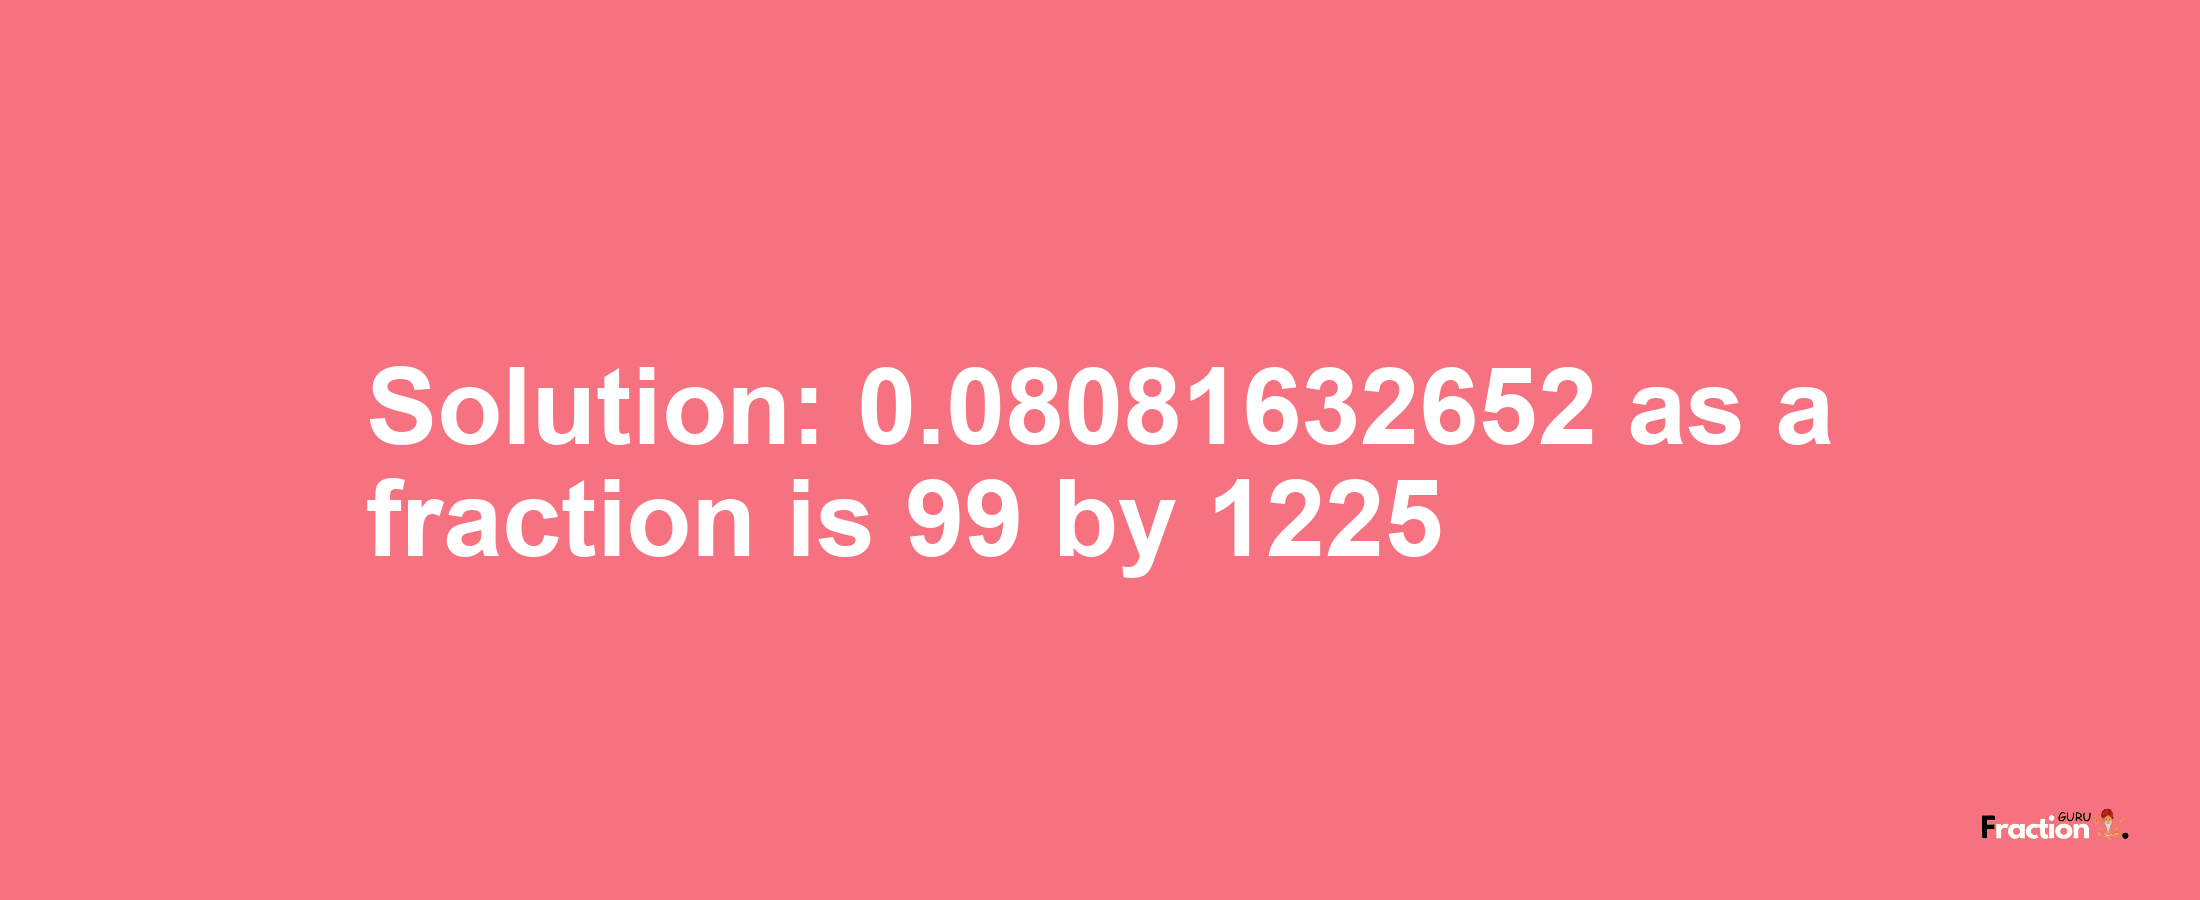 Solution:0.08081632652 as a fraction is 99/1225